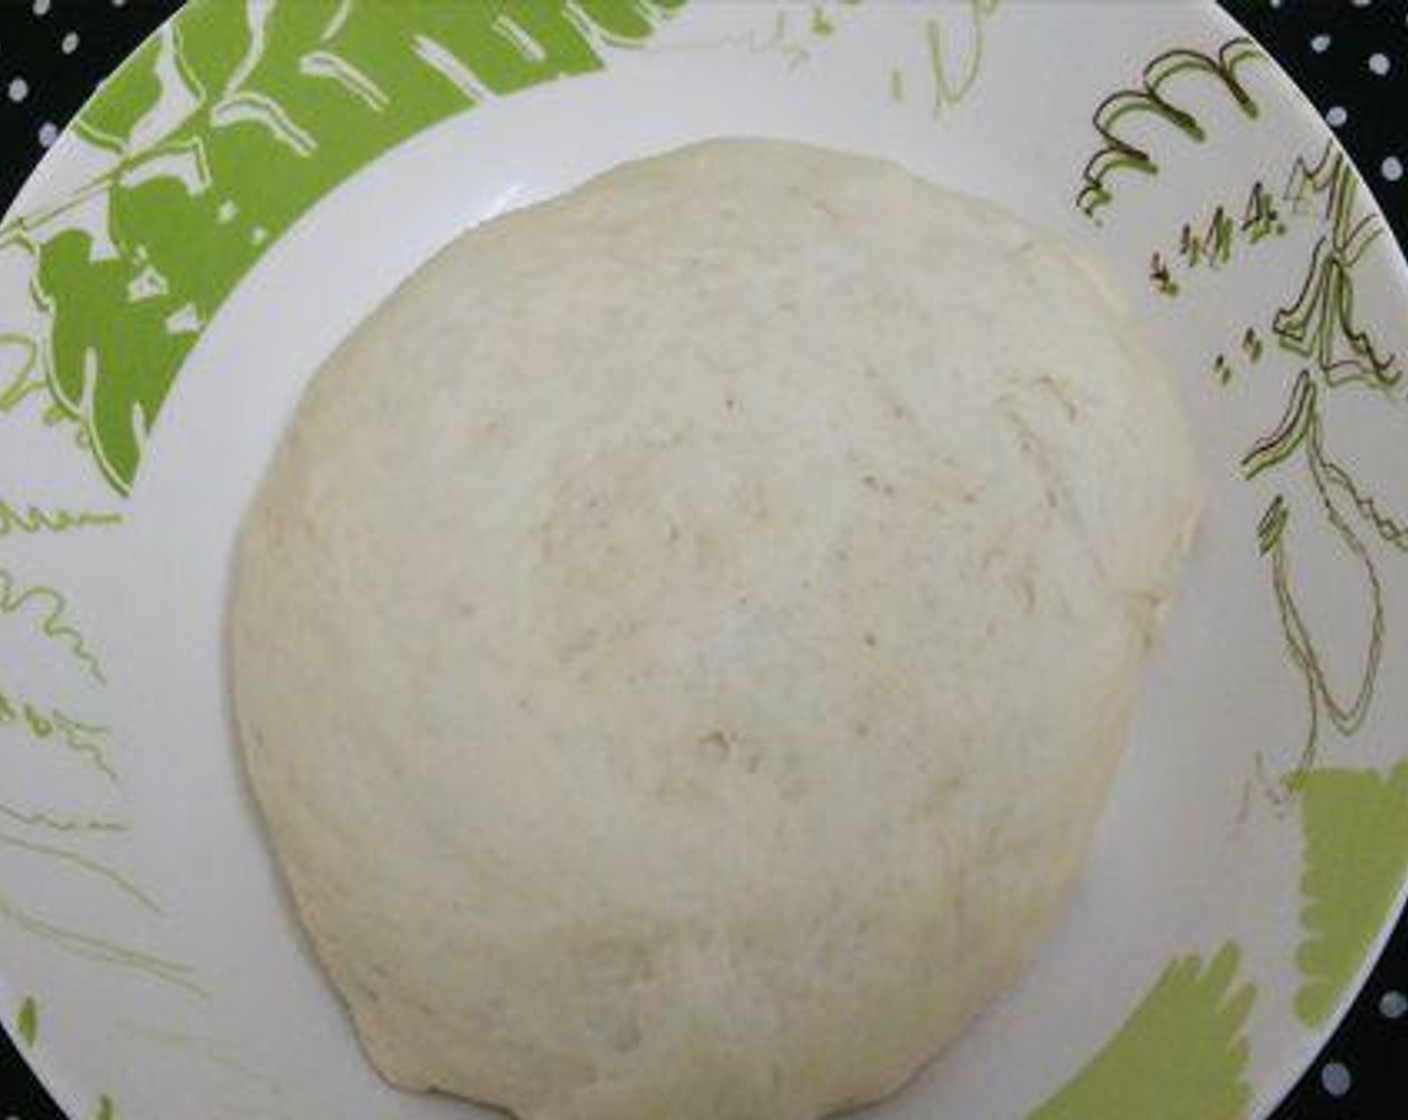 step 1 To a bowl add All-Purpose Flour (1 cup), Baking Powder (1/4 tsp), Caster Sugar (1/2 tsp), and Salt (to taste) and combine well. Add Yogurt (1/4 cup) and mix.  Add Water (to taste) as required and make a smooth dough. Apply some Butter (to taste) on the dough and cover with a cling foil or a wet towel. Let it rise for an hour.